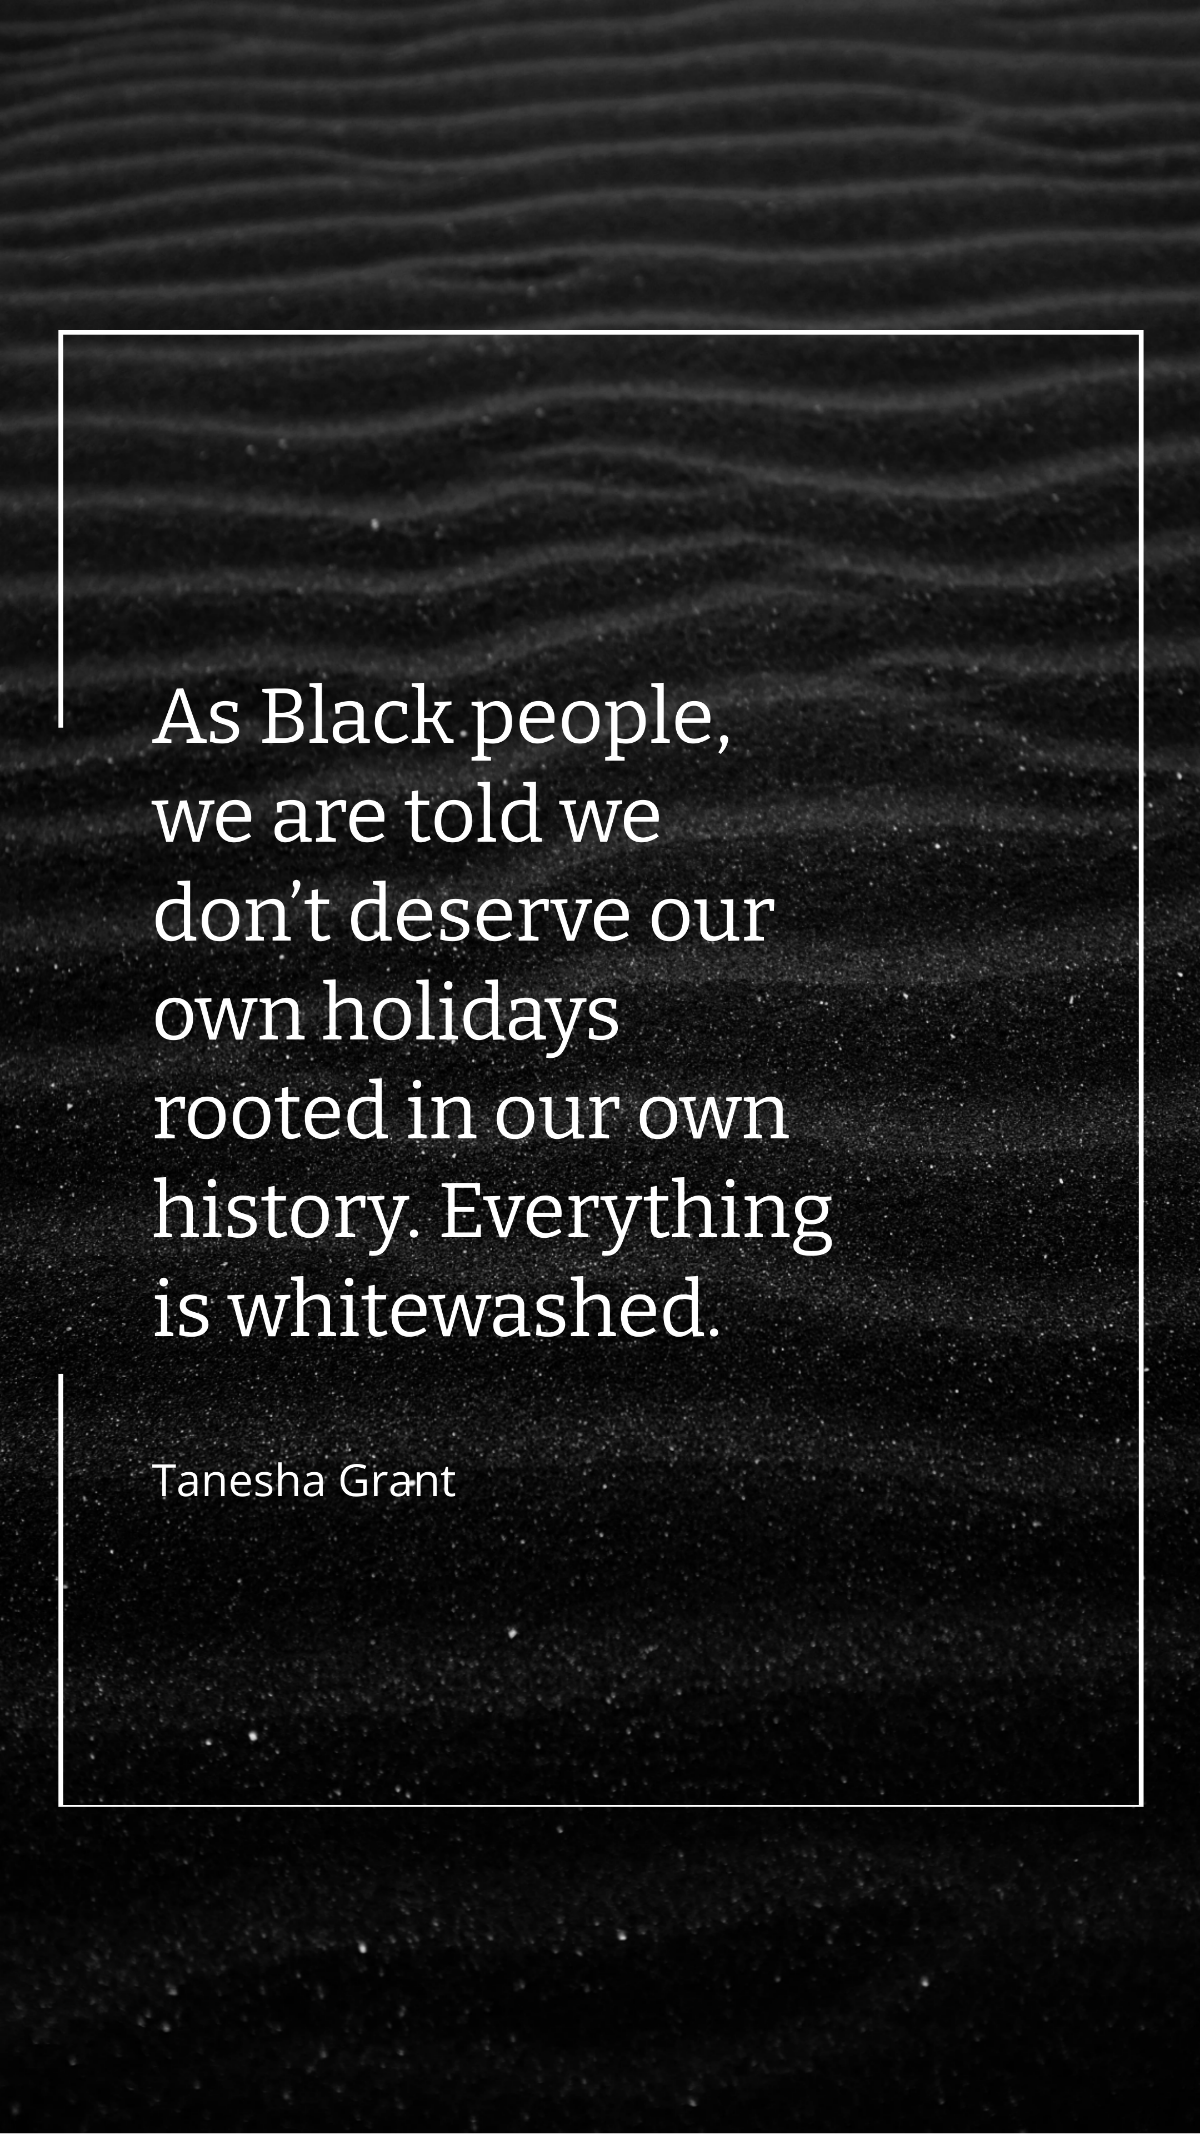 Tanesha Grant - As Black people, we are told we don’t deserve our own holidays rooted in our own history. Everything is whitewashed. Template